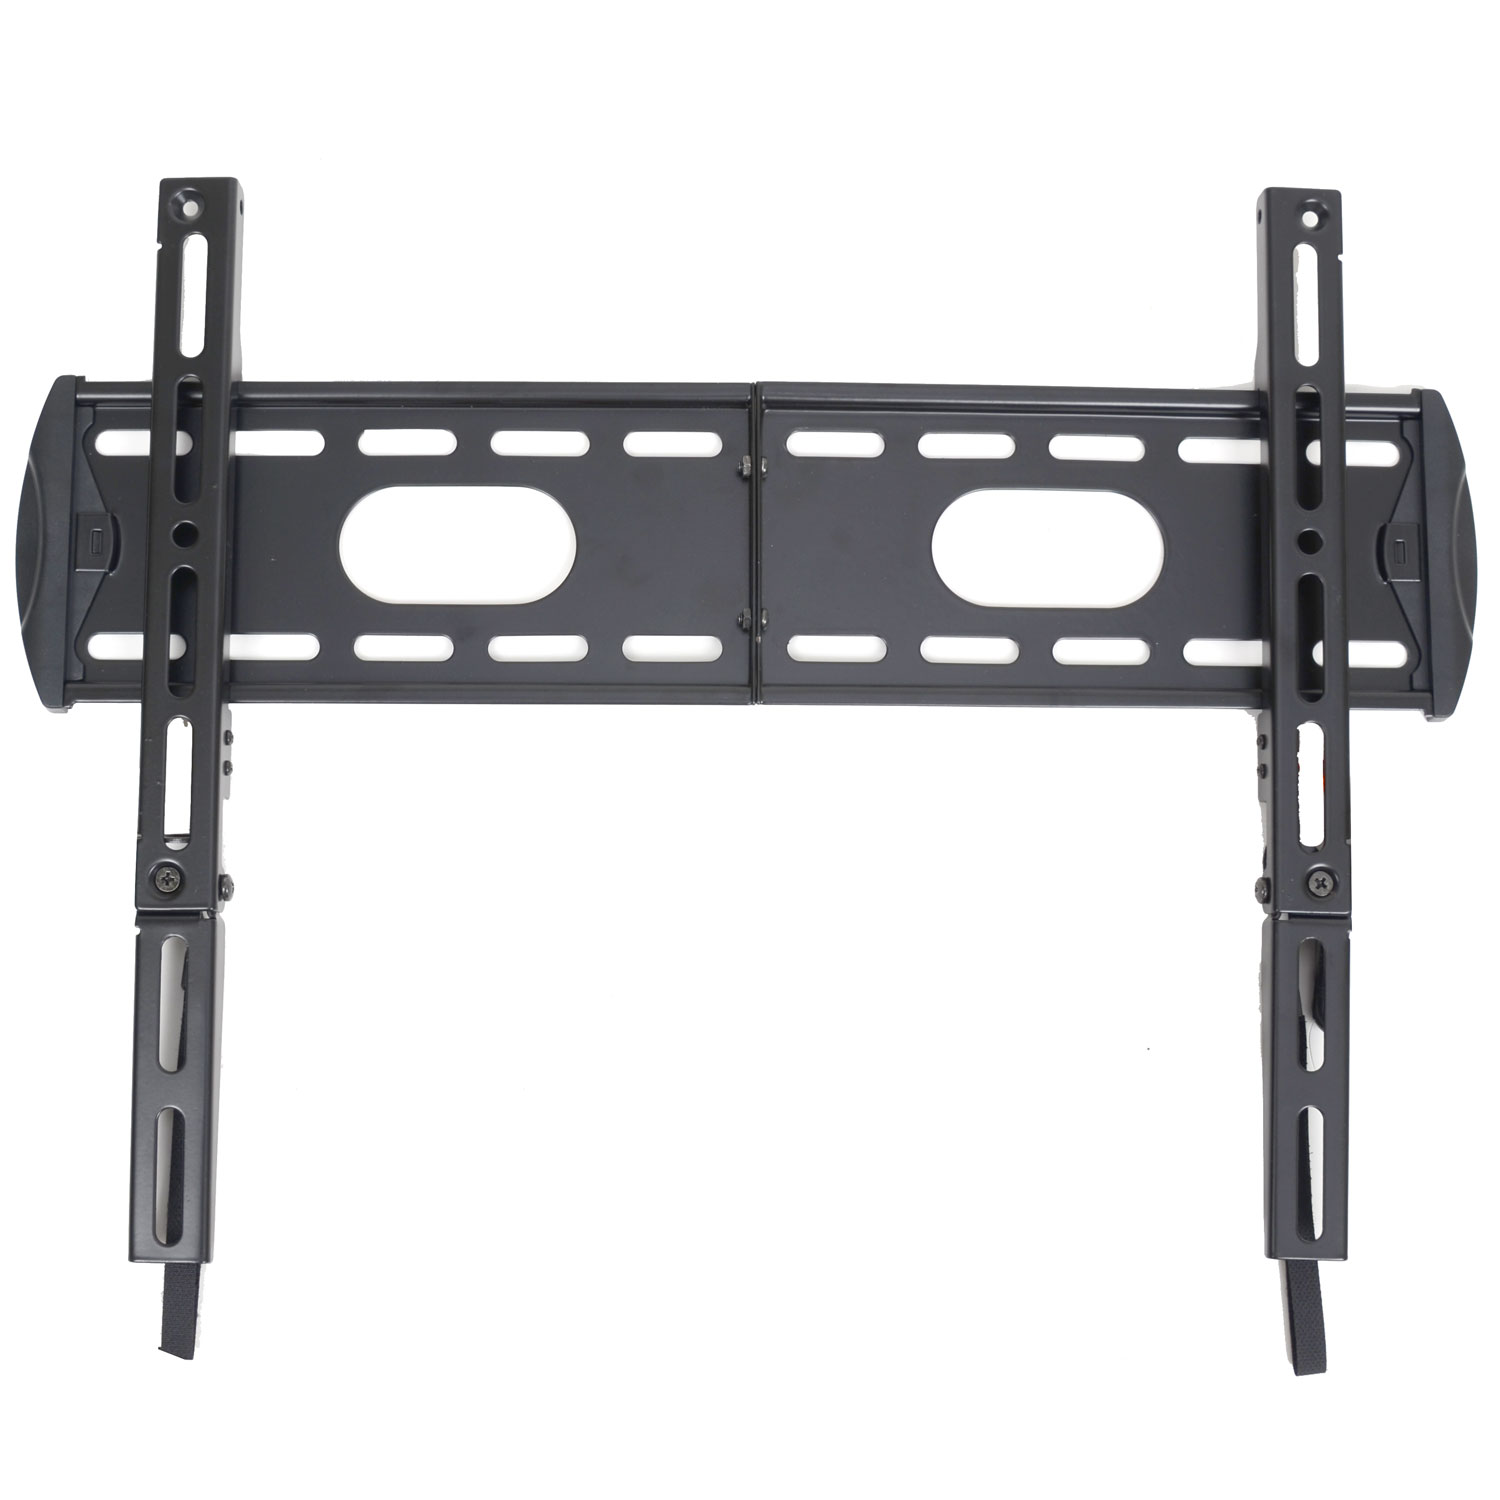 VideoSecu Ultra Slim TV Wall Mount for 27 28 29 32 39 40 42 43 46 47 48" LCD Plasma Some LED 50" Flat Panel Screen bia - image 4 of 4